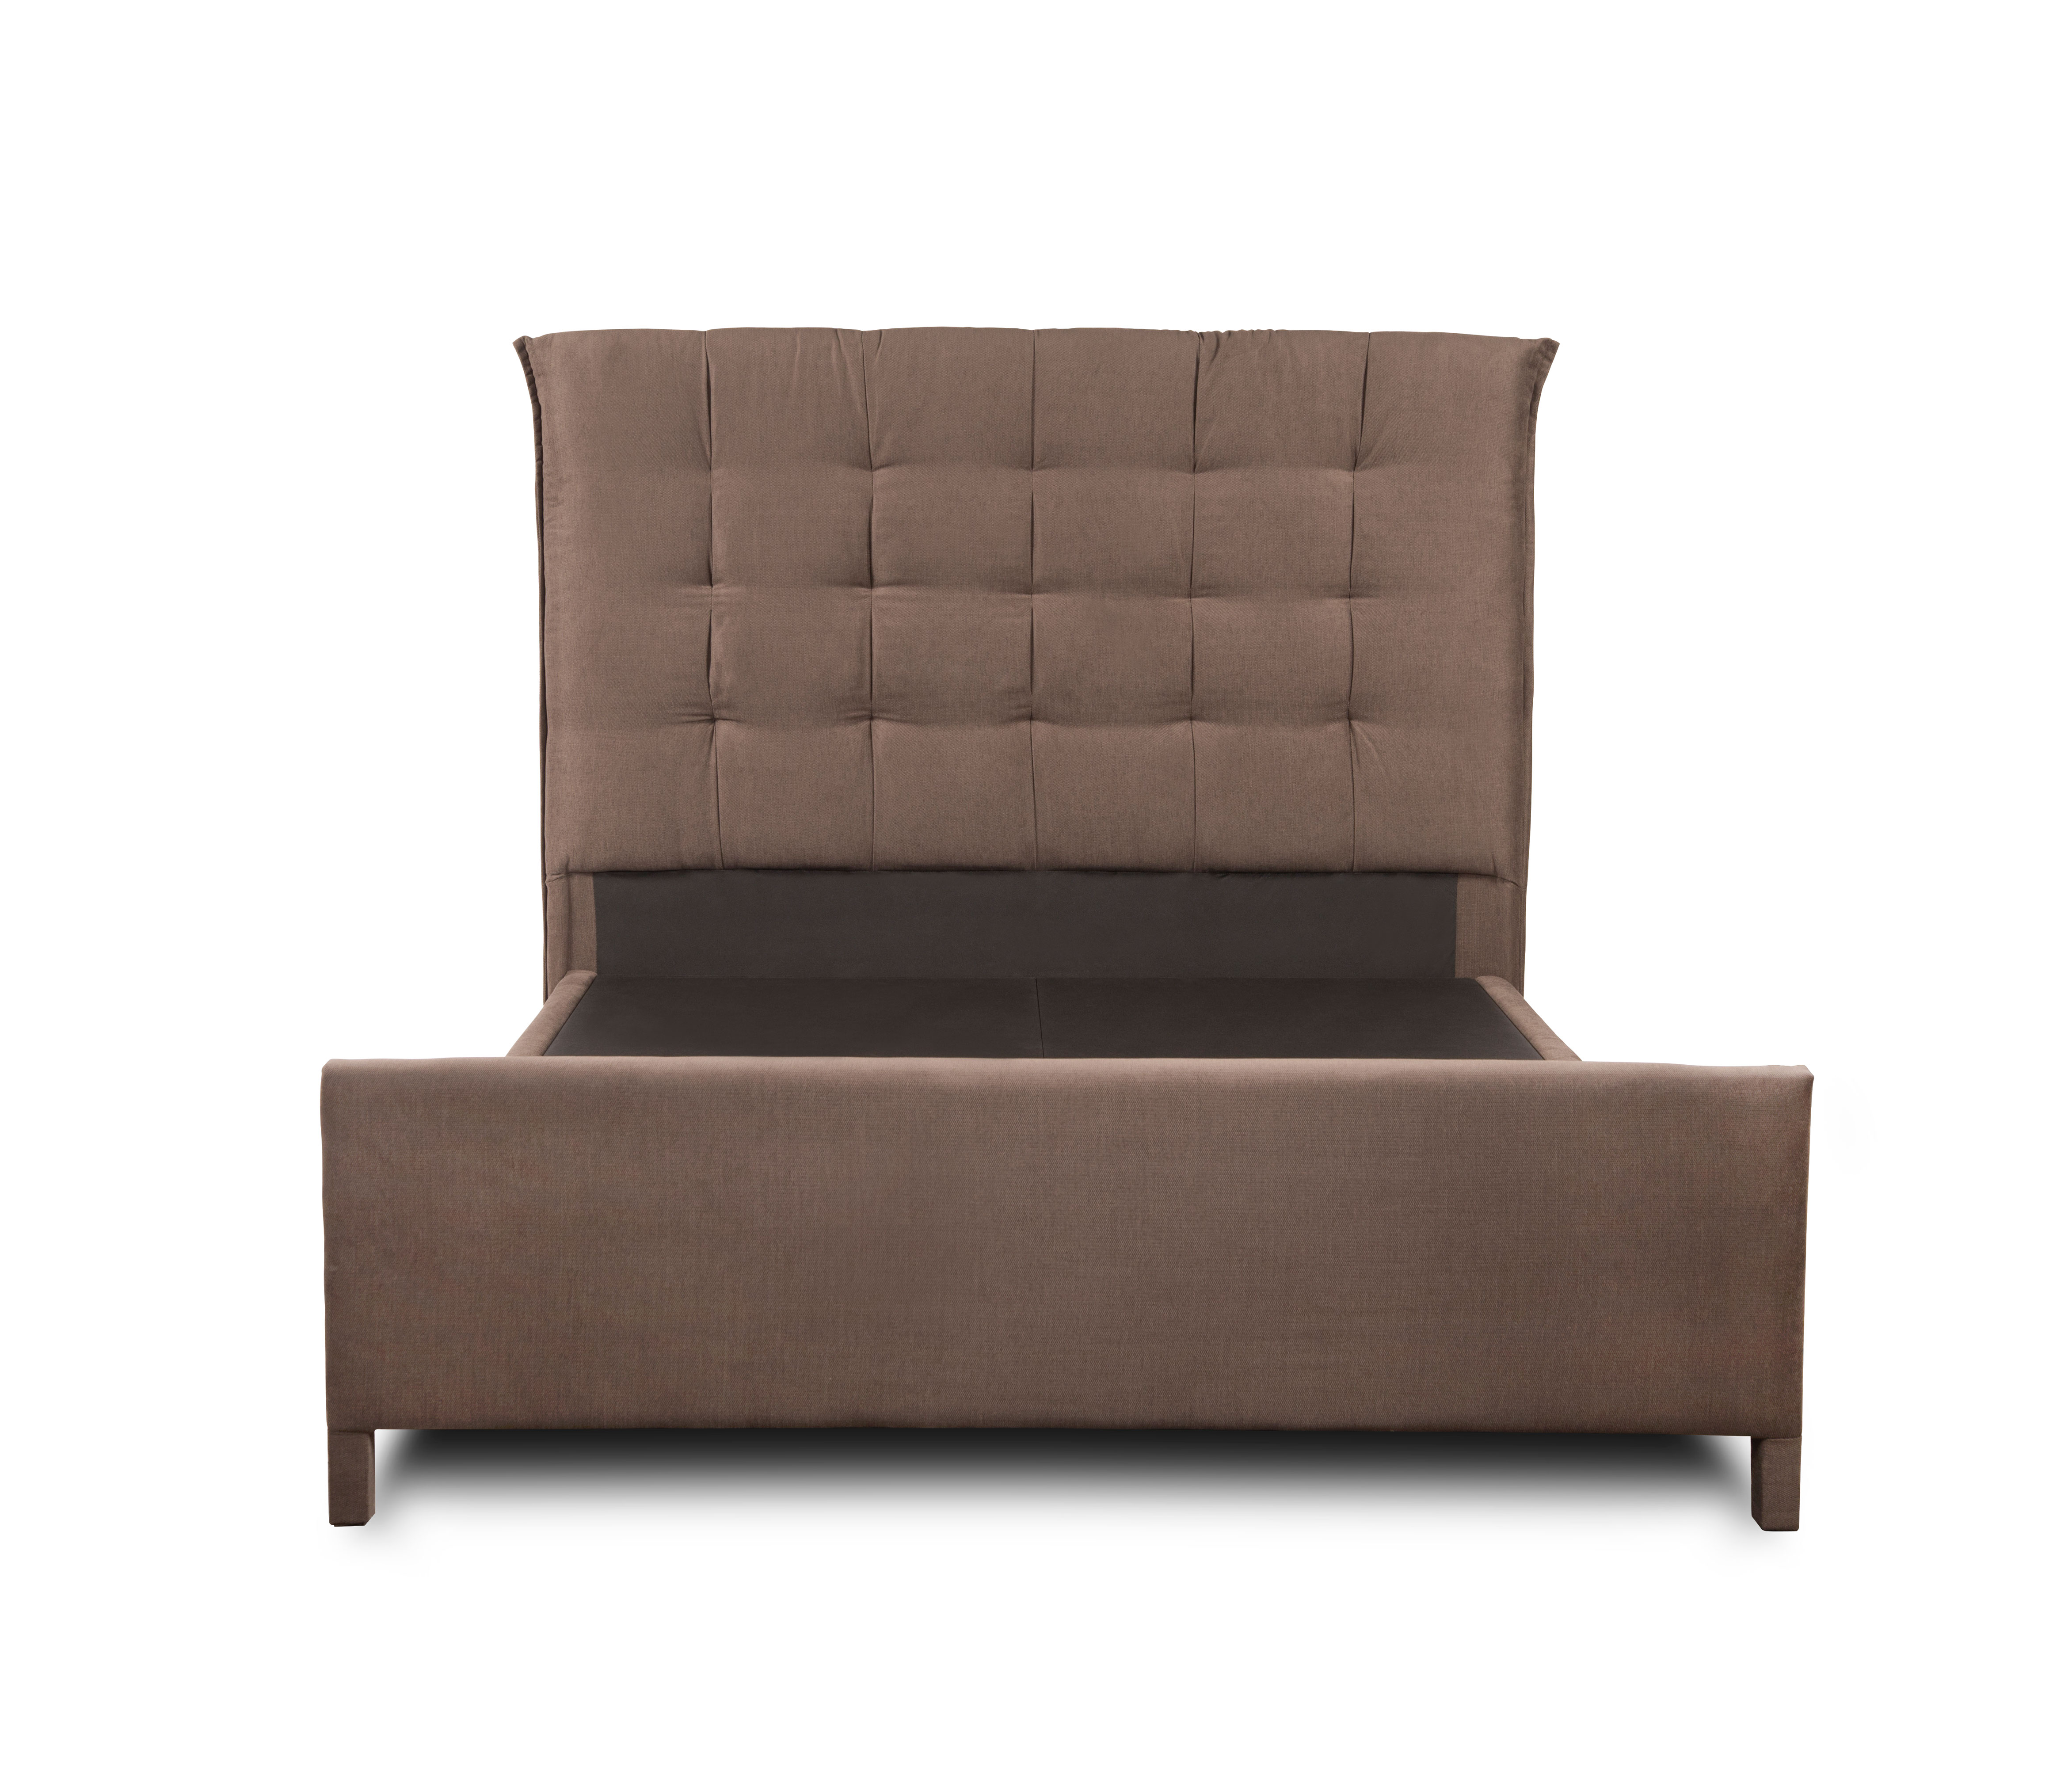 Cama queen size Zitlala - Taupe